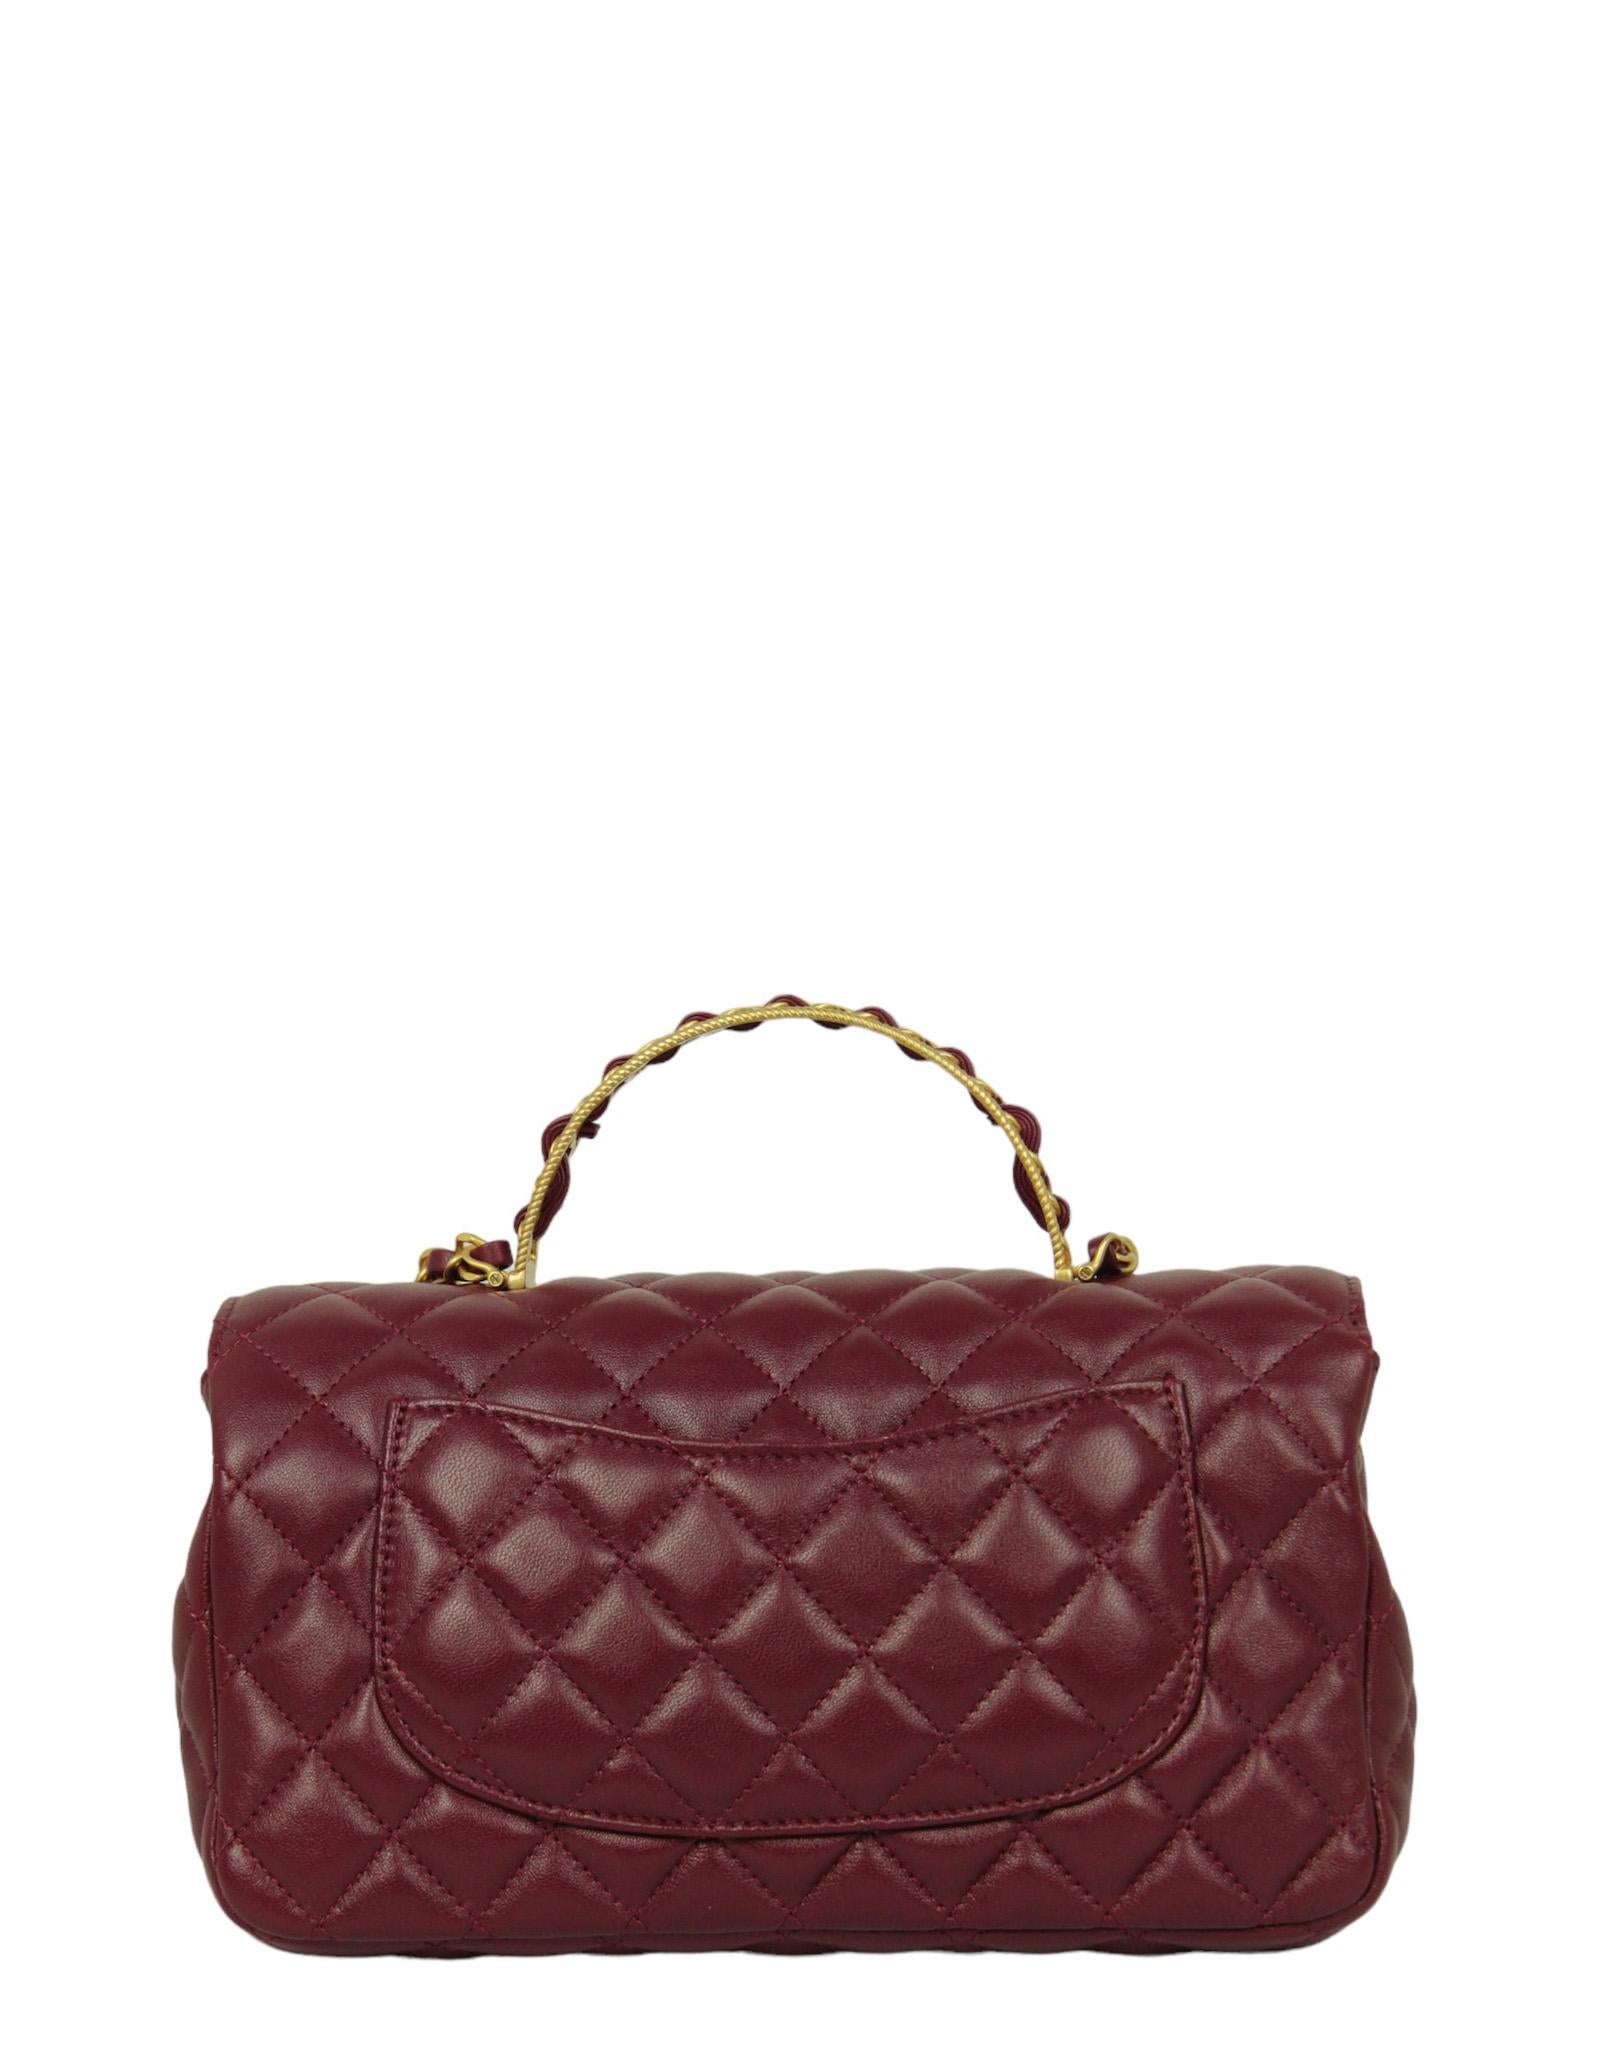 Chanel Burgundy Lambskin Leather Quilted Flapbag w/ Handle In Excellent Condition For Sale In New York, NY